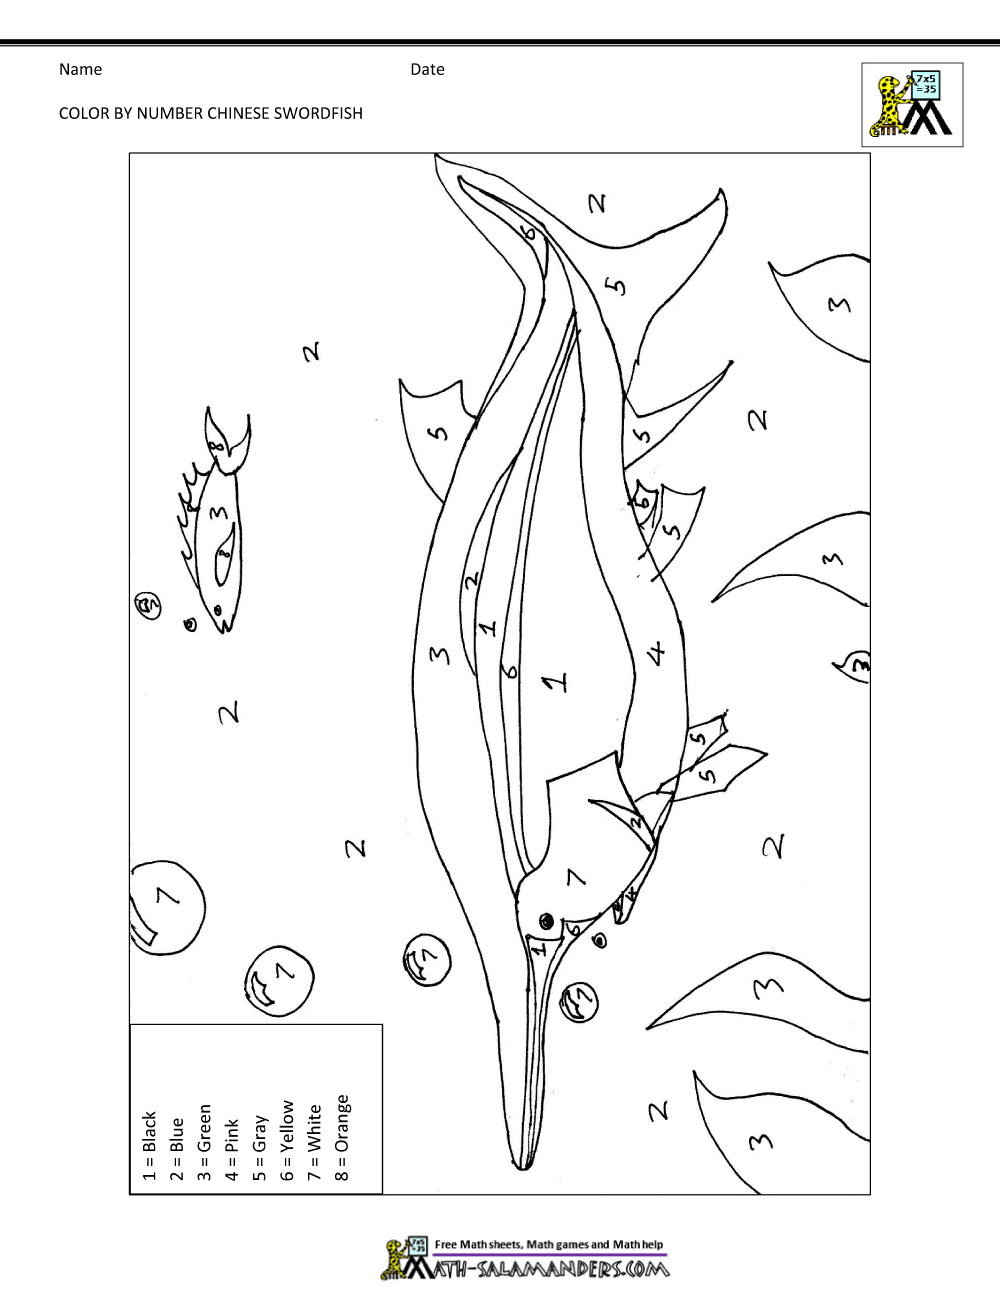 kindergarten coloring pages chinese swordfish - Kindergarten Coloring Page